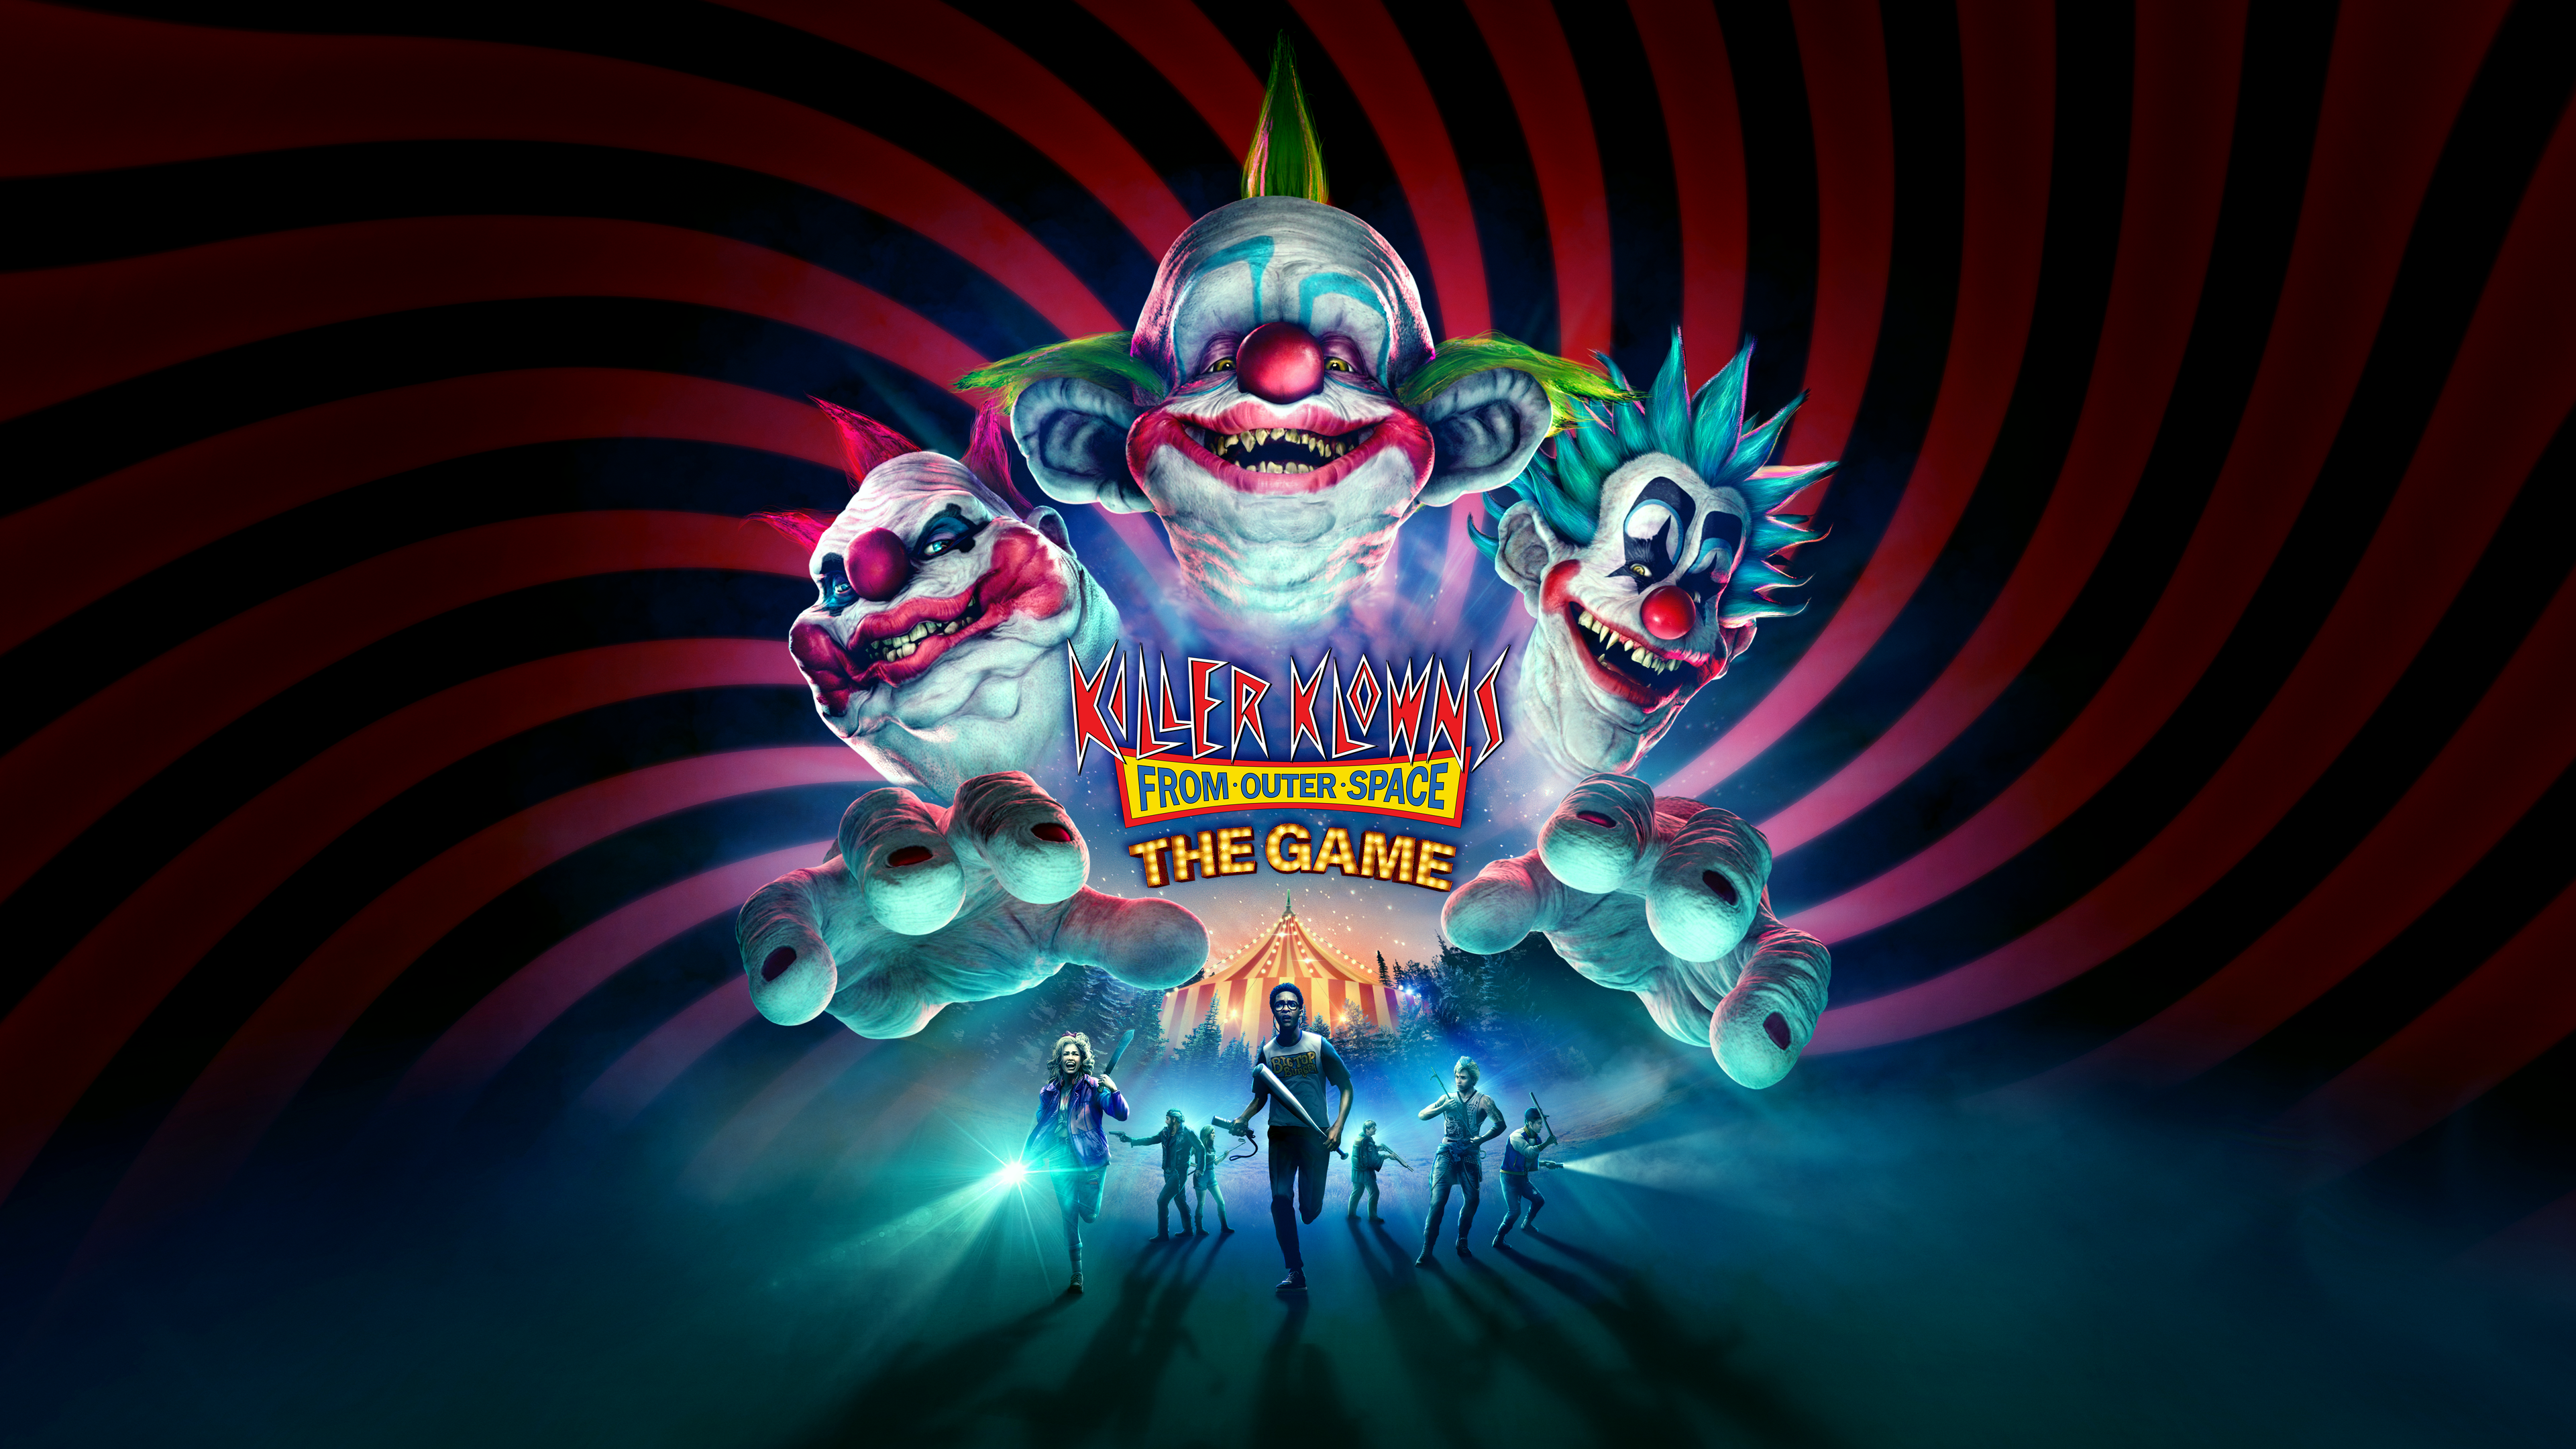 An image advertising the Killer Klowns from Outer Space game, with three clowns heads peering ominously over a group of seven people